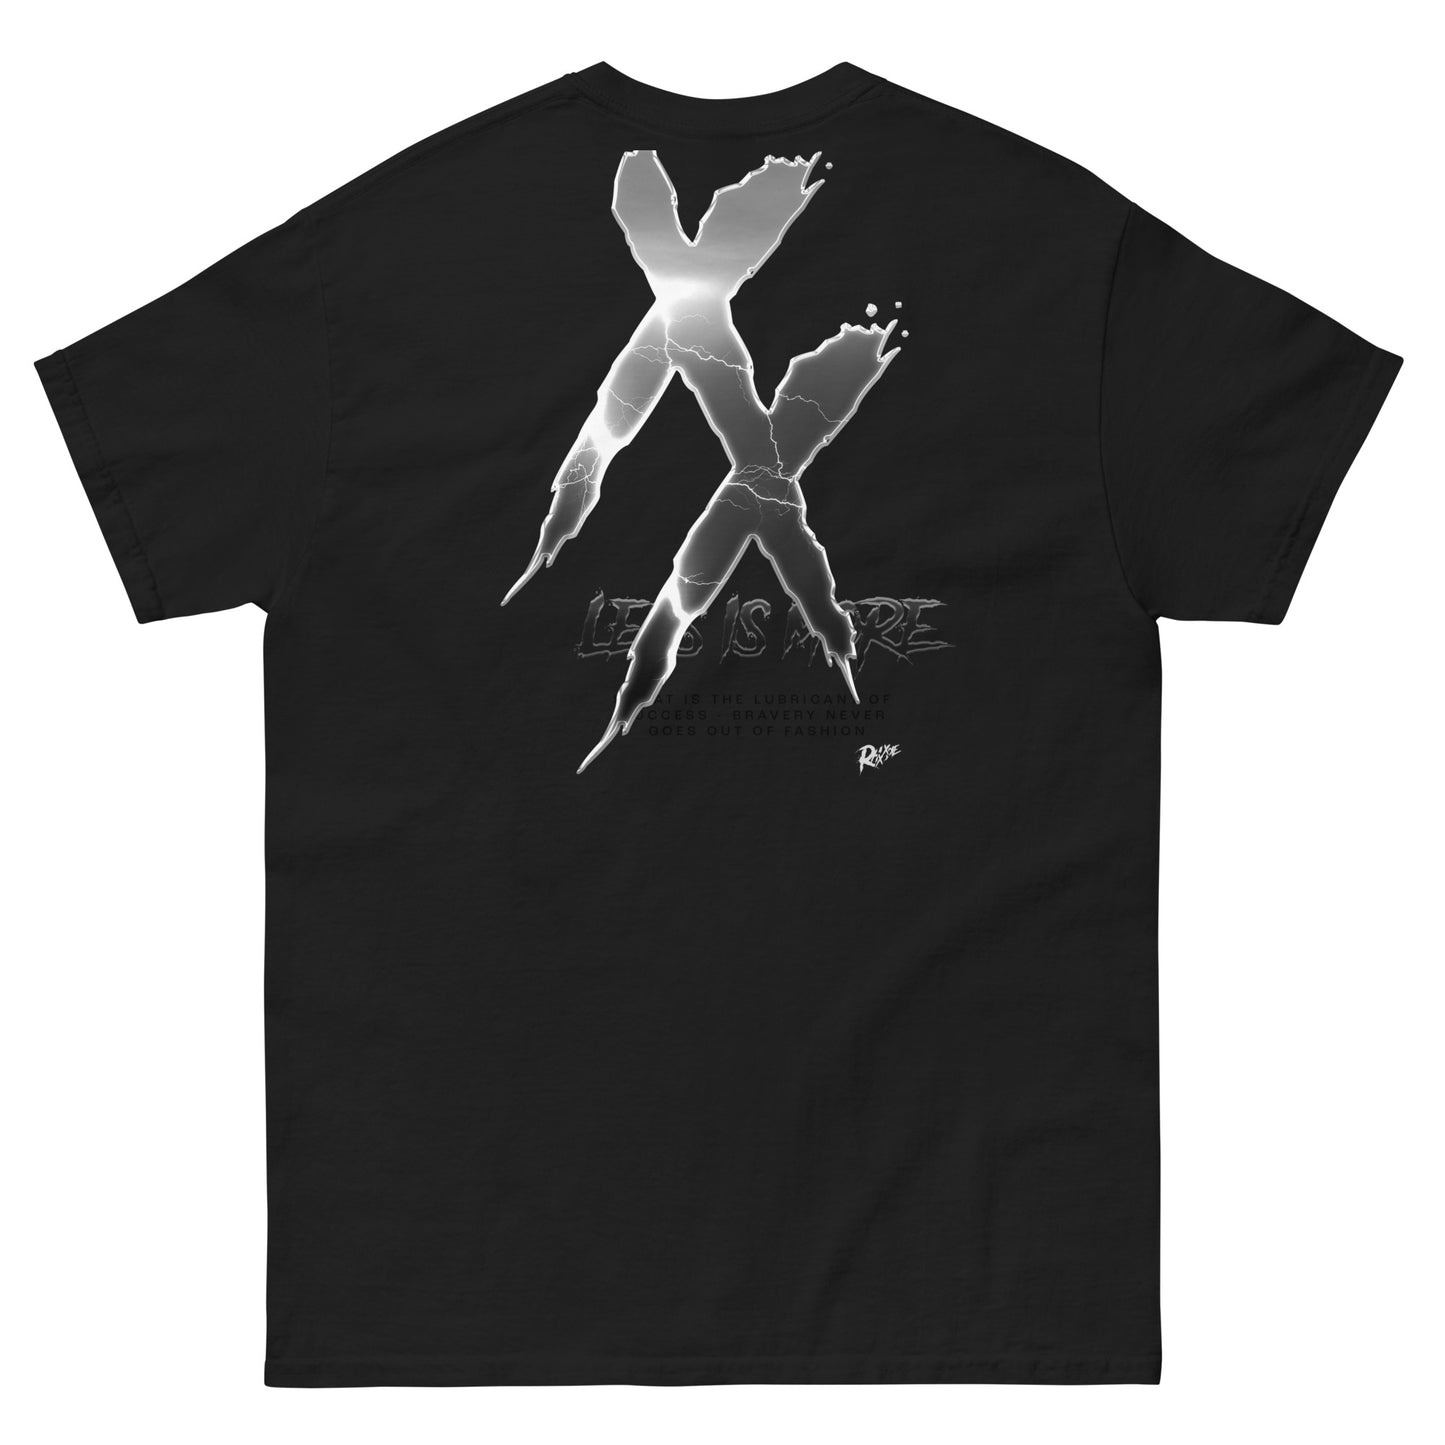 Less is More - Black Lightning Graphic Tee